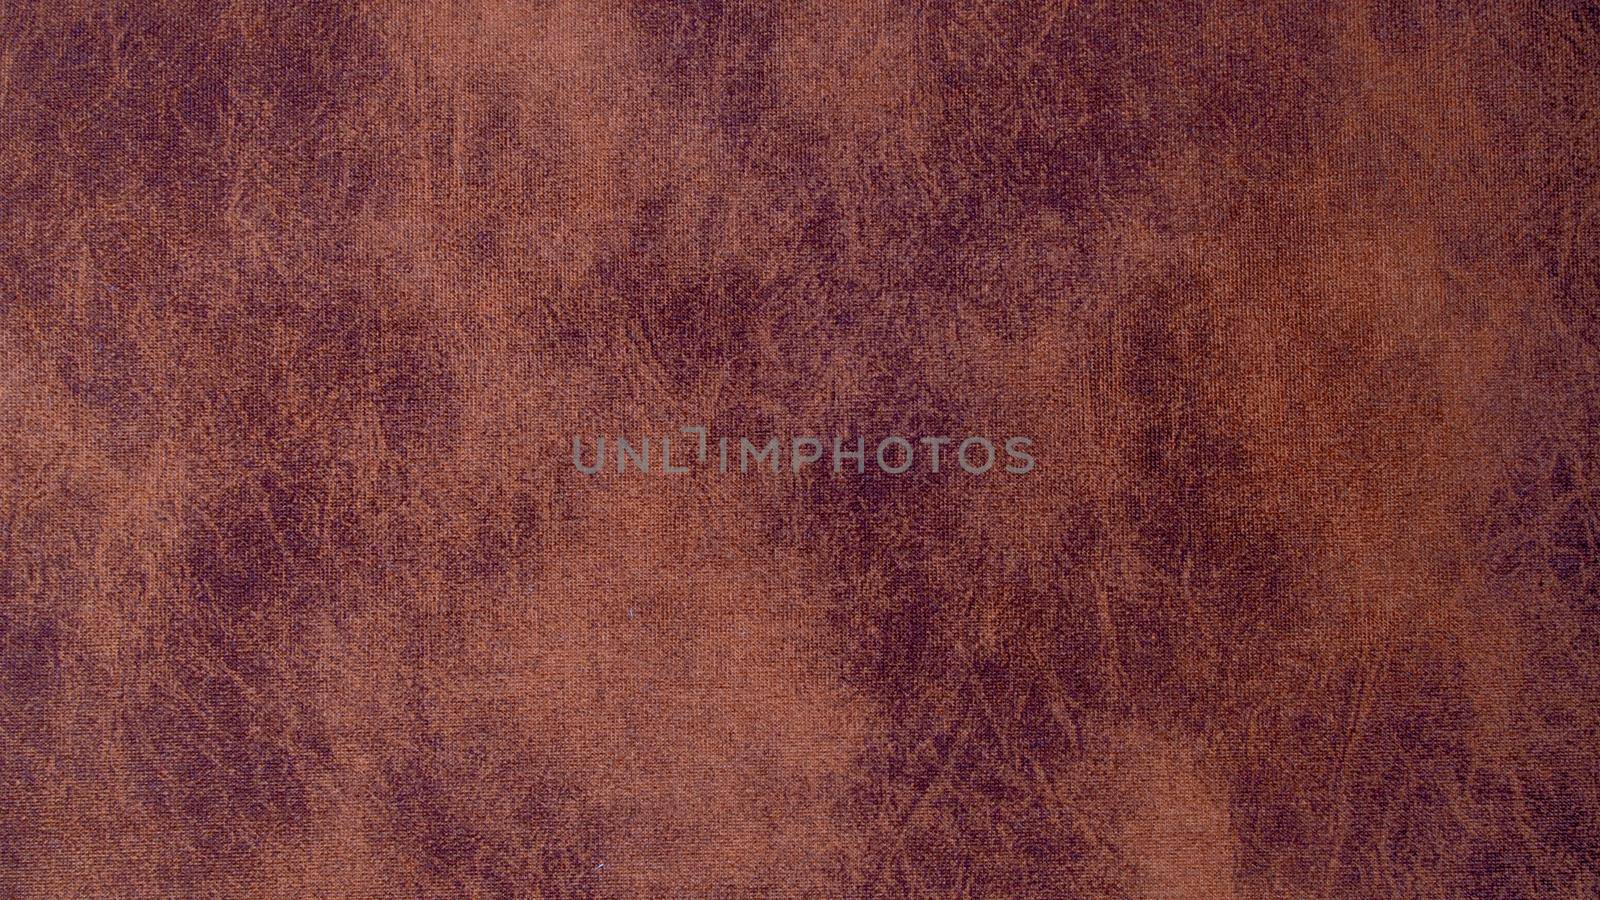 Background texture orange red fabric upholstery furniture by voktybre